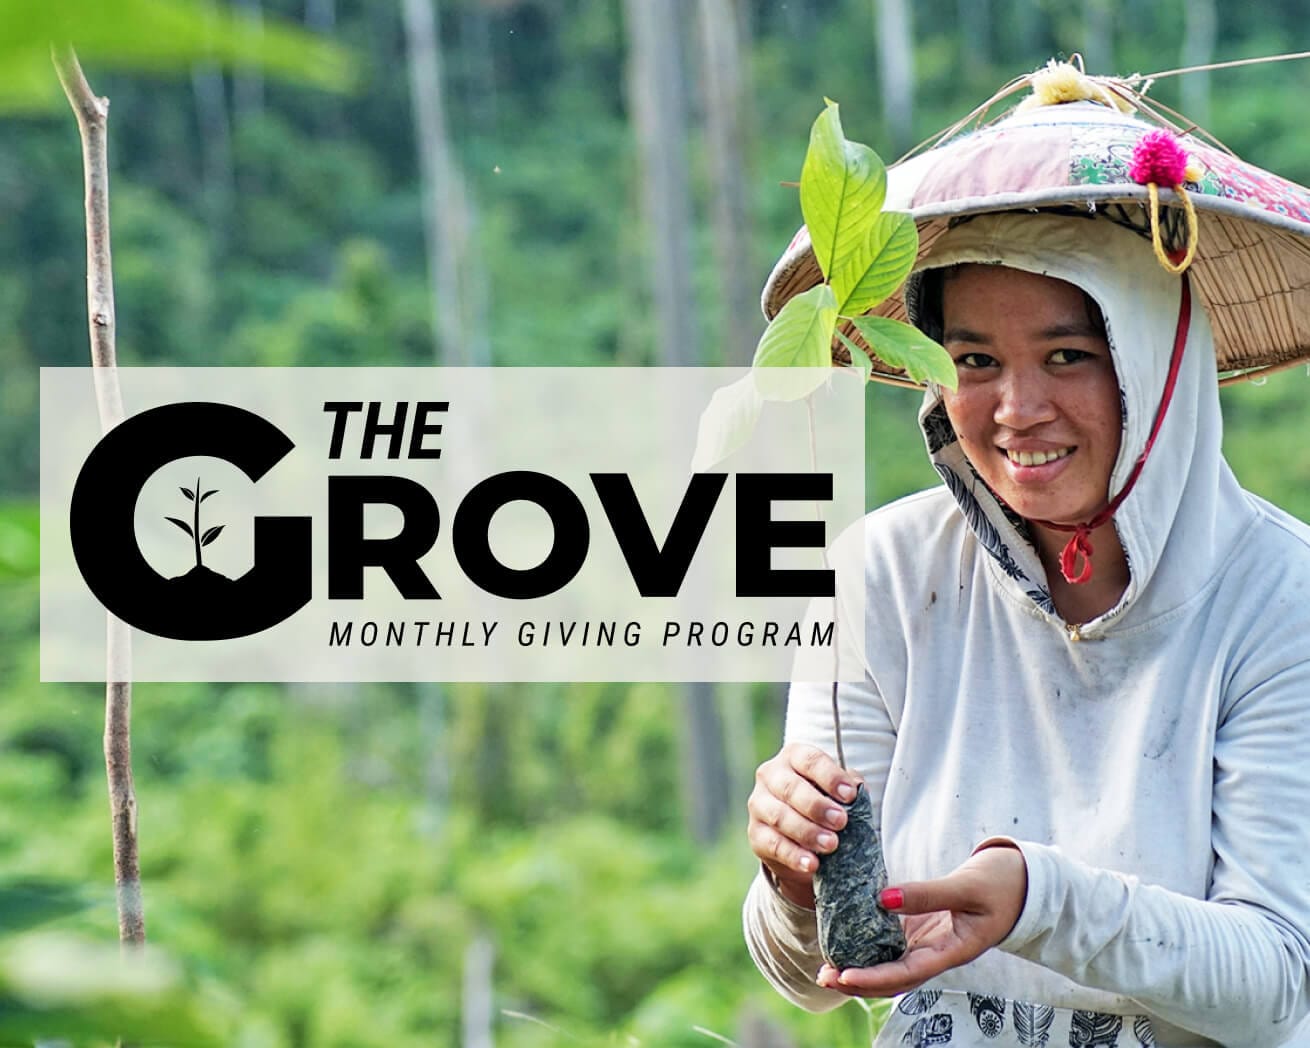 The Grove: Monthly Giving